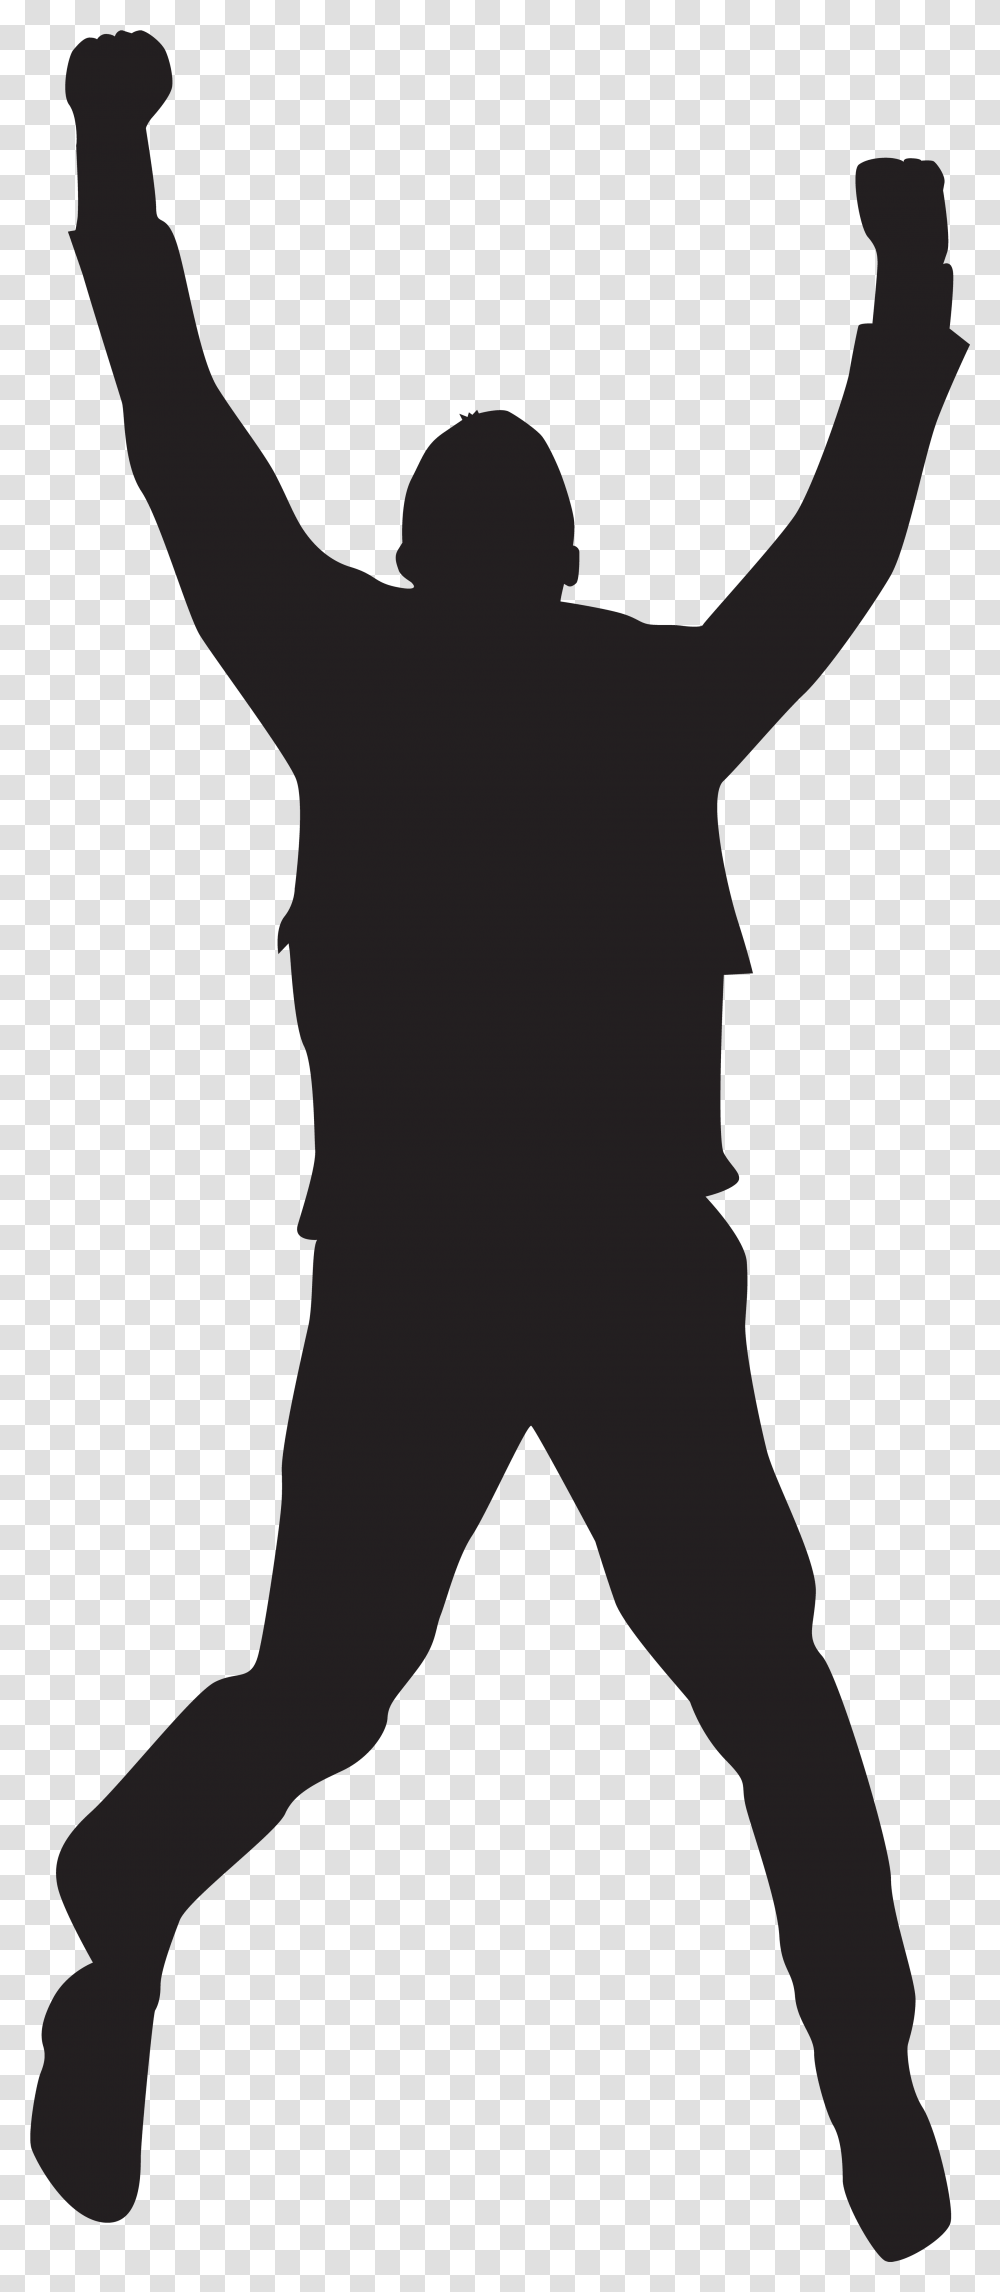 Happy Silhouette Silhouette Of A Person Jumping, Human, Standing, Hand, Back Transparent Png